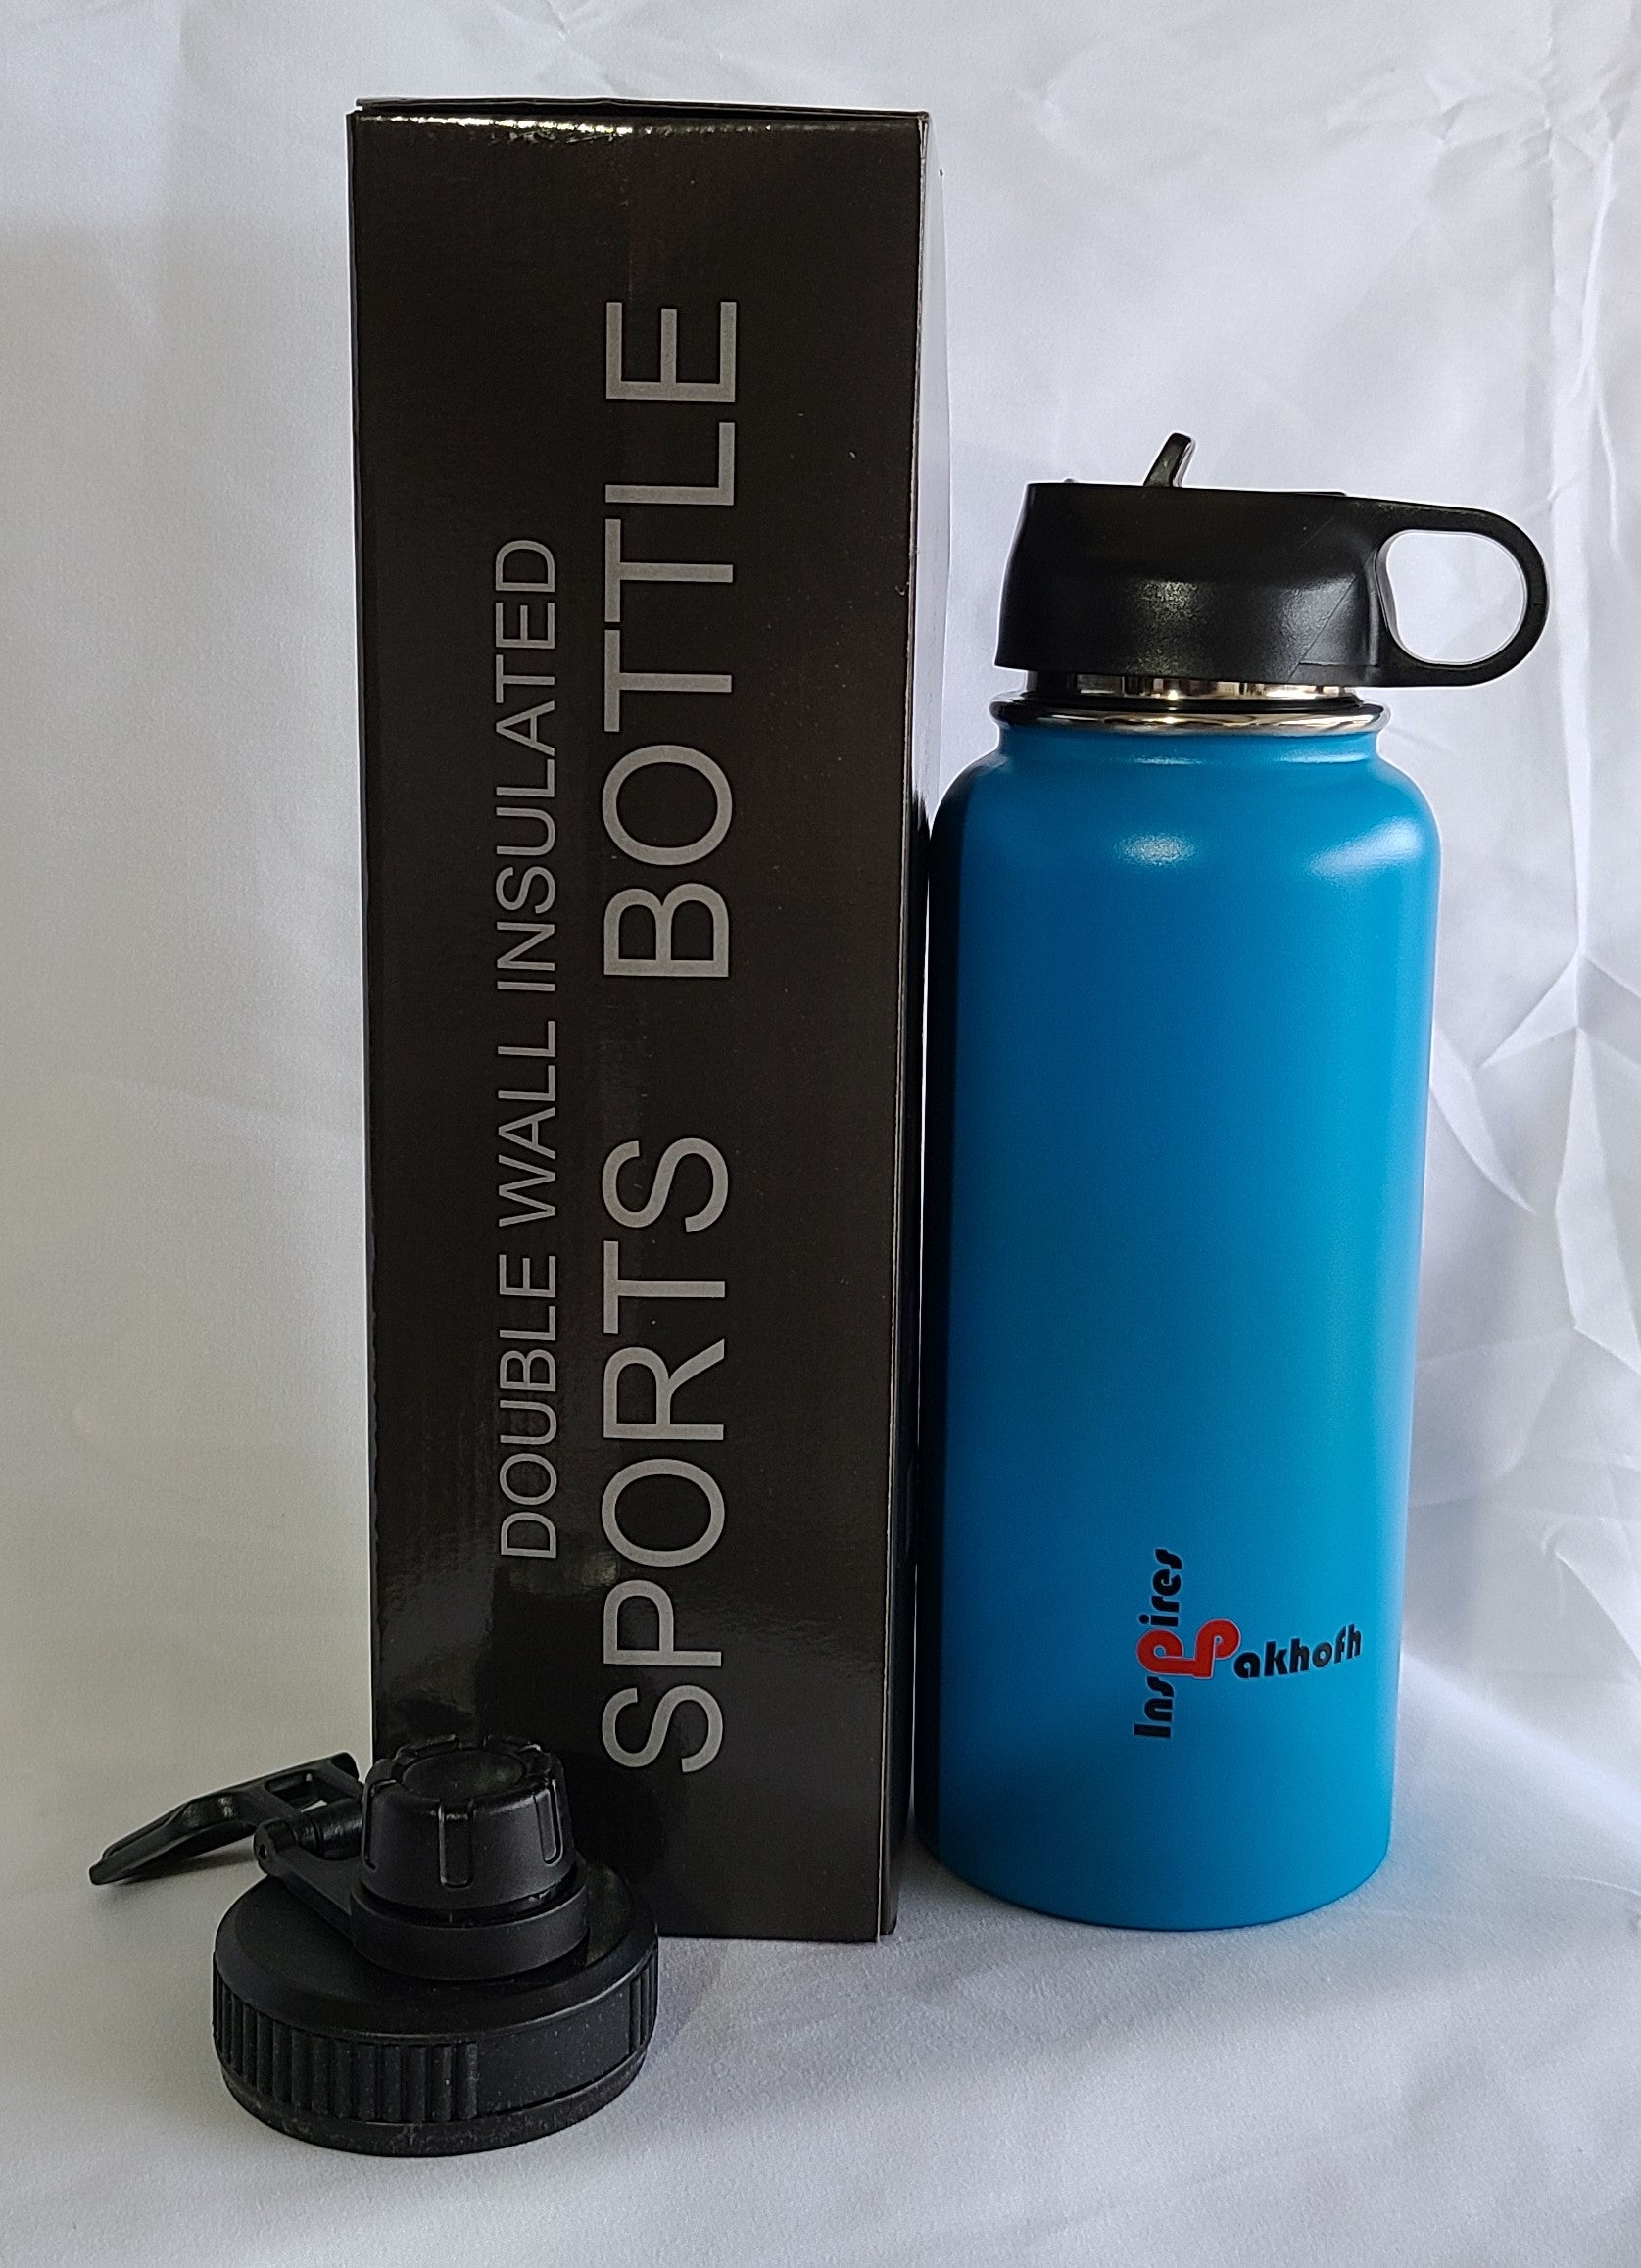 Thermoflask Double Stainless Steel Insulated Water Bottle 32 oz Black